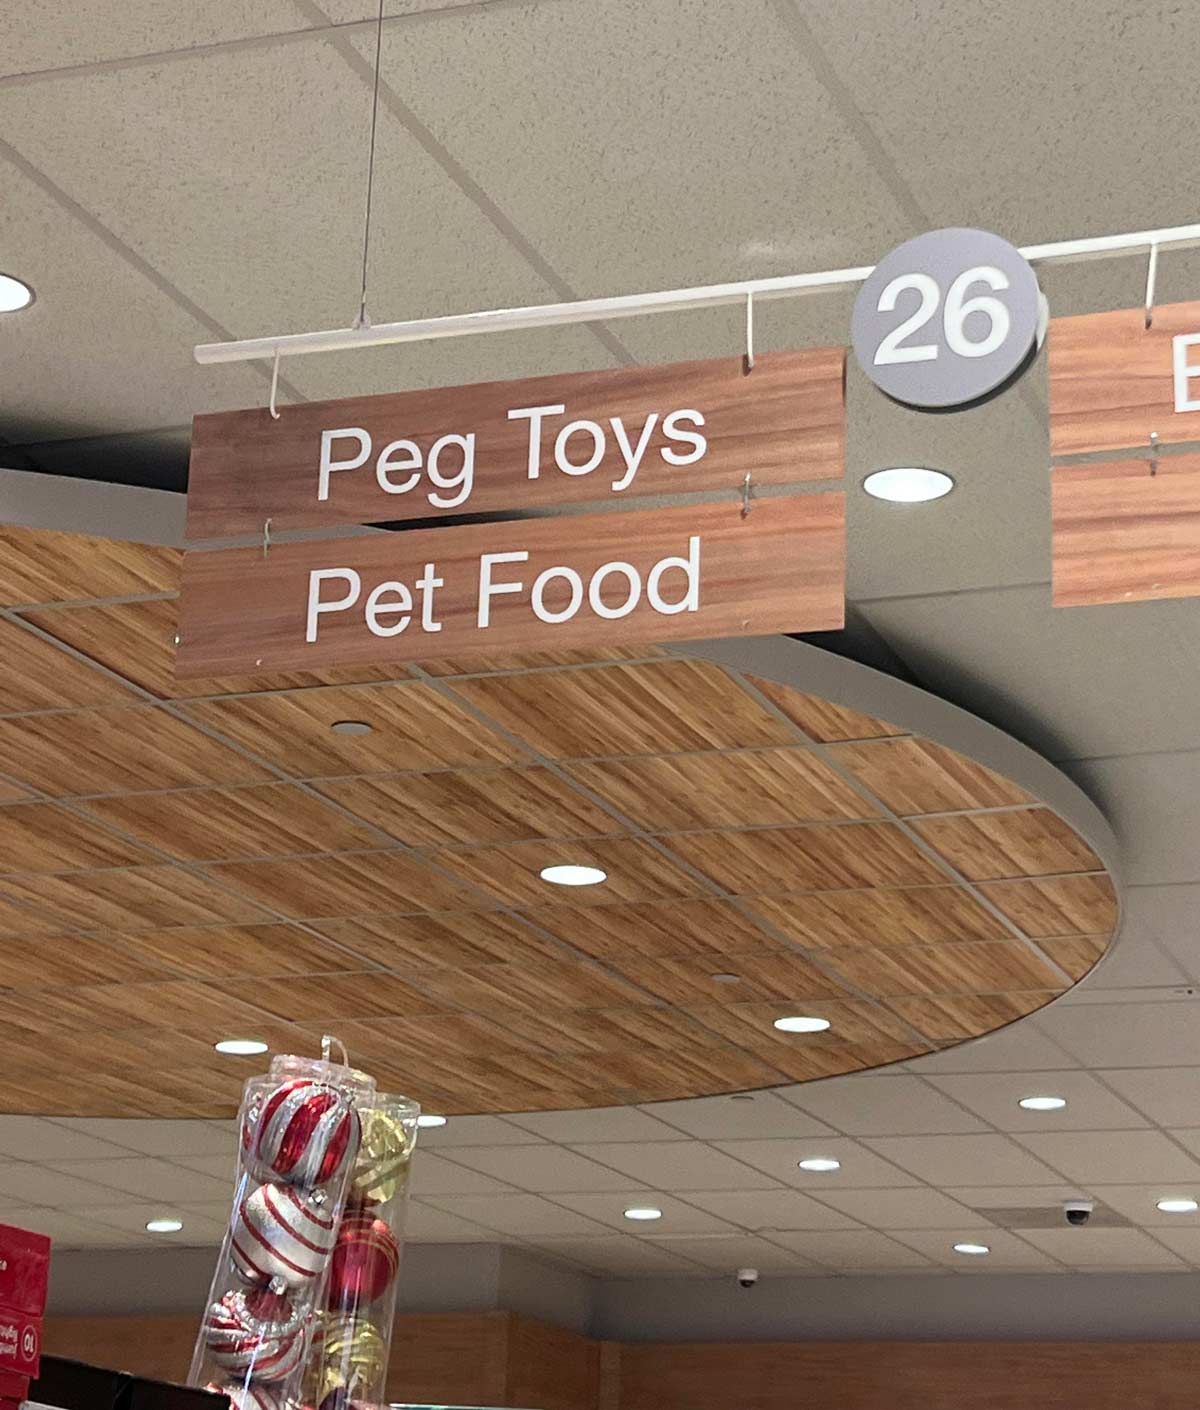 Find “Peg Toys” at your local Rite Aid today